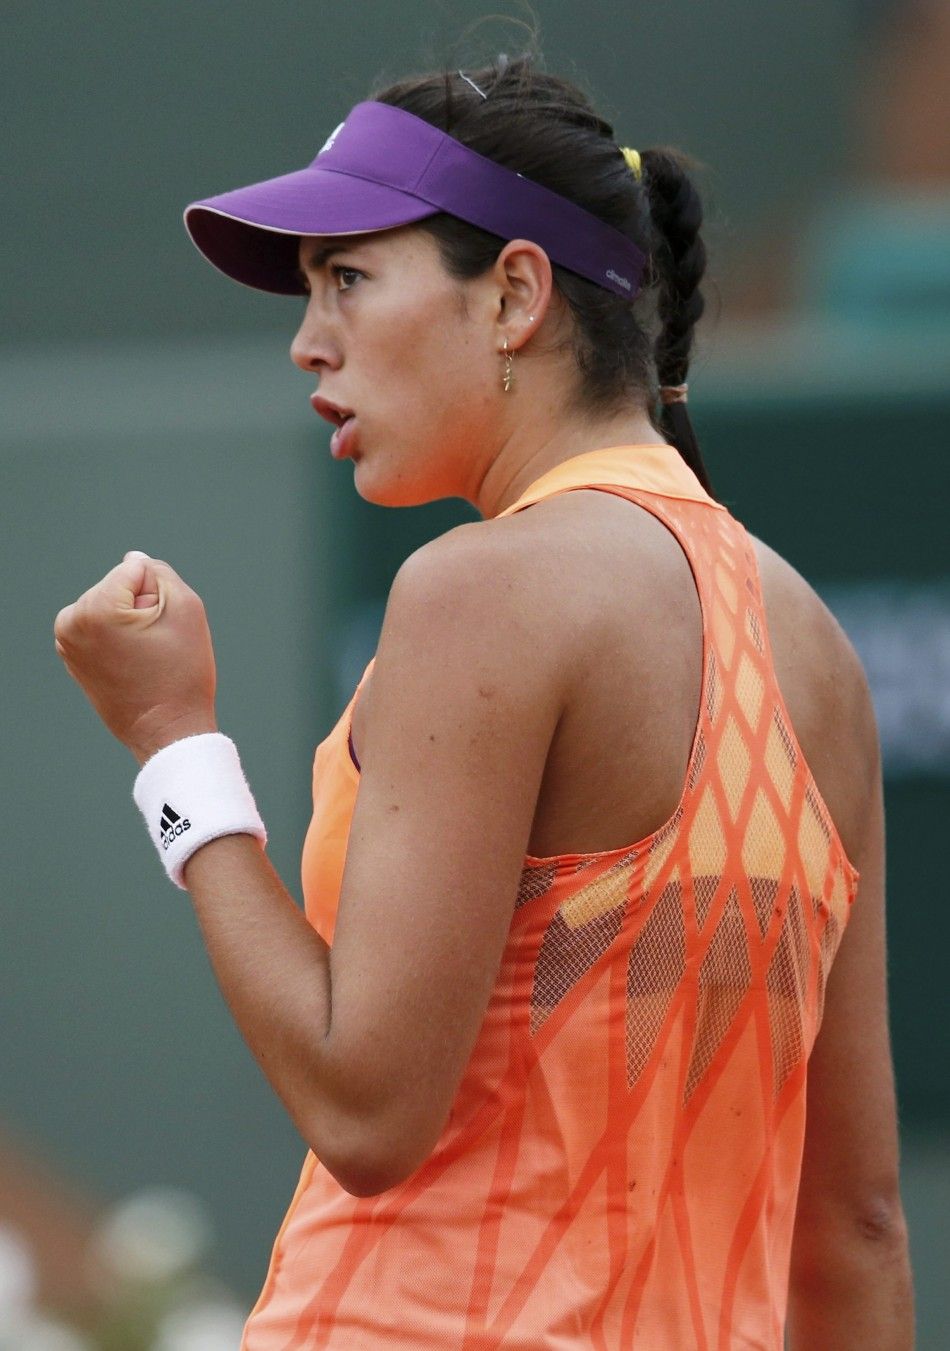 Garbine Muguruza of Spain reacts during her womens singles match against Serena Williams of the U.S. at the French Open tennis tournament at the Roland Garros stadium in Paris May 28, 2014. 